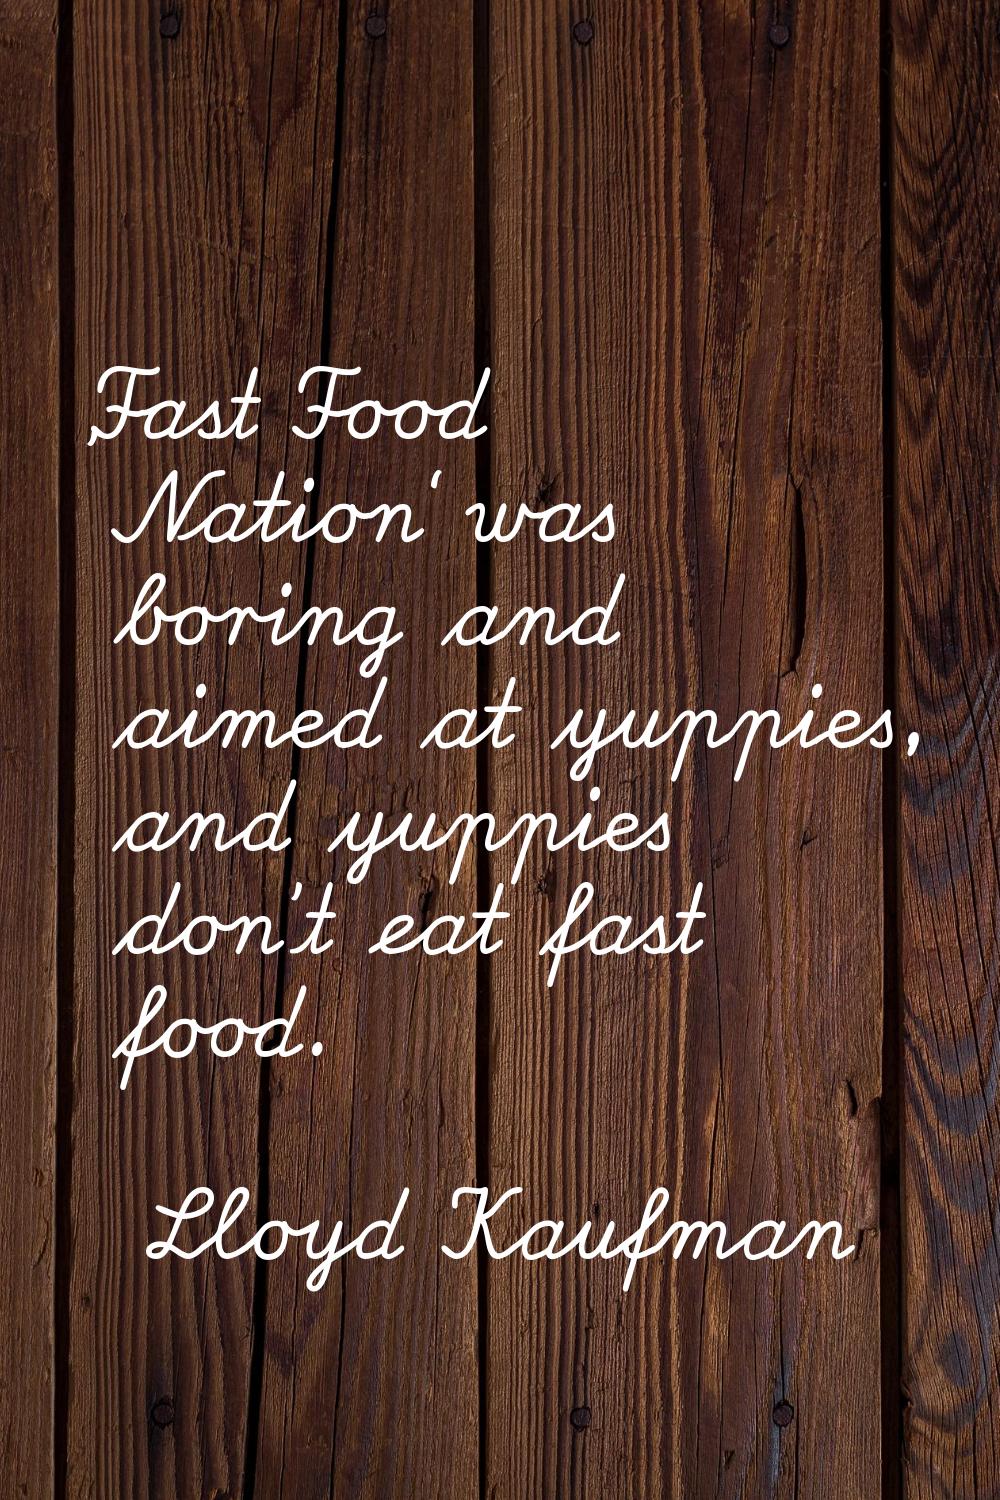 'Fast Food Nation' was boring and aimed at yuppies, and yuppies don't eat fast food.